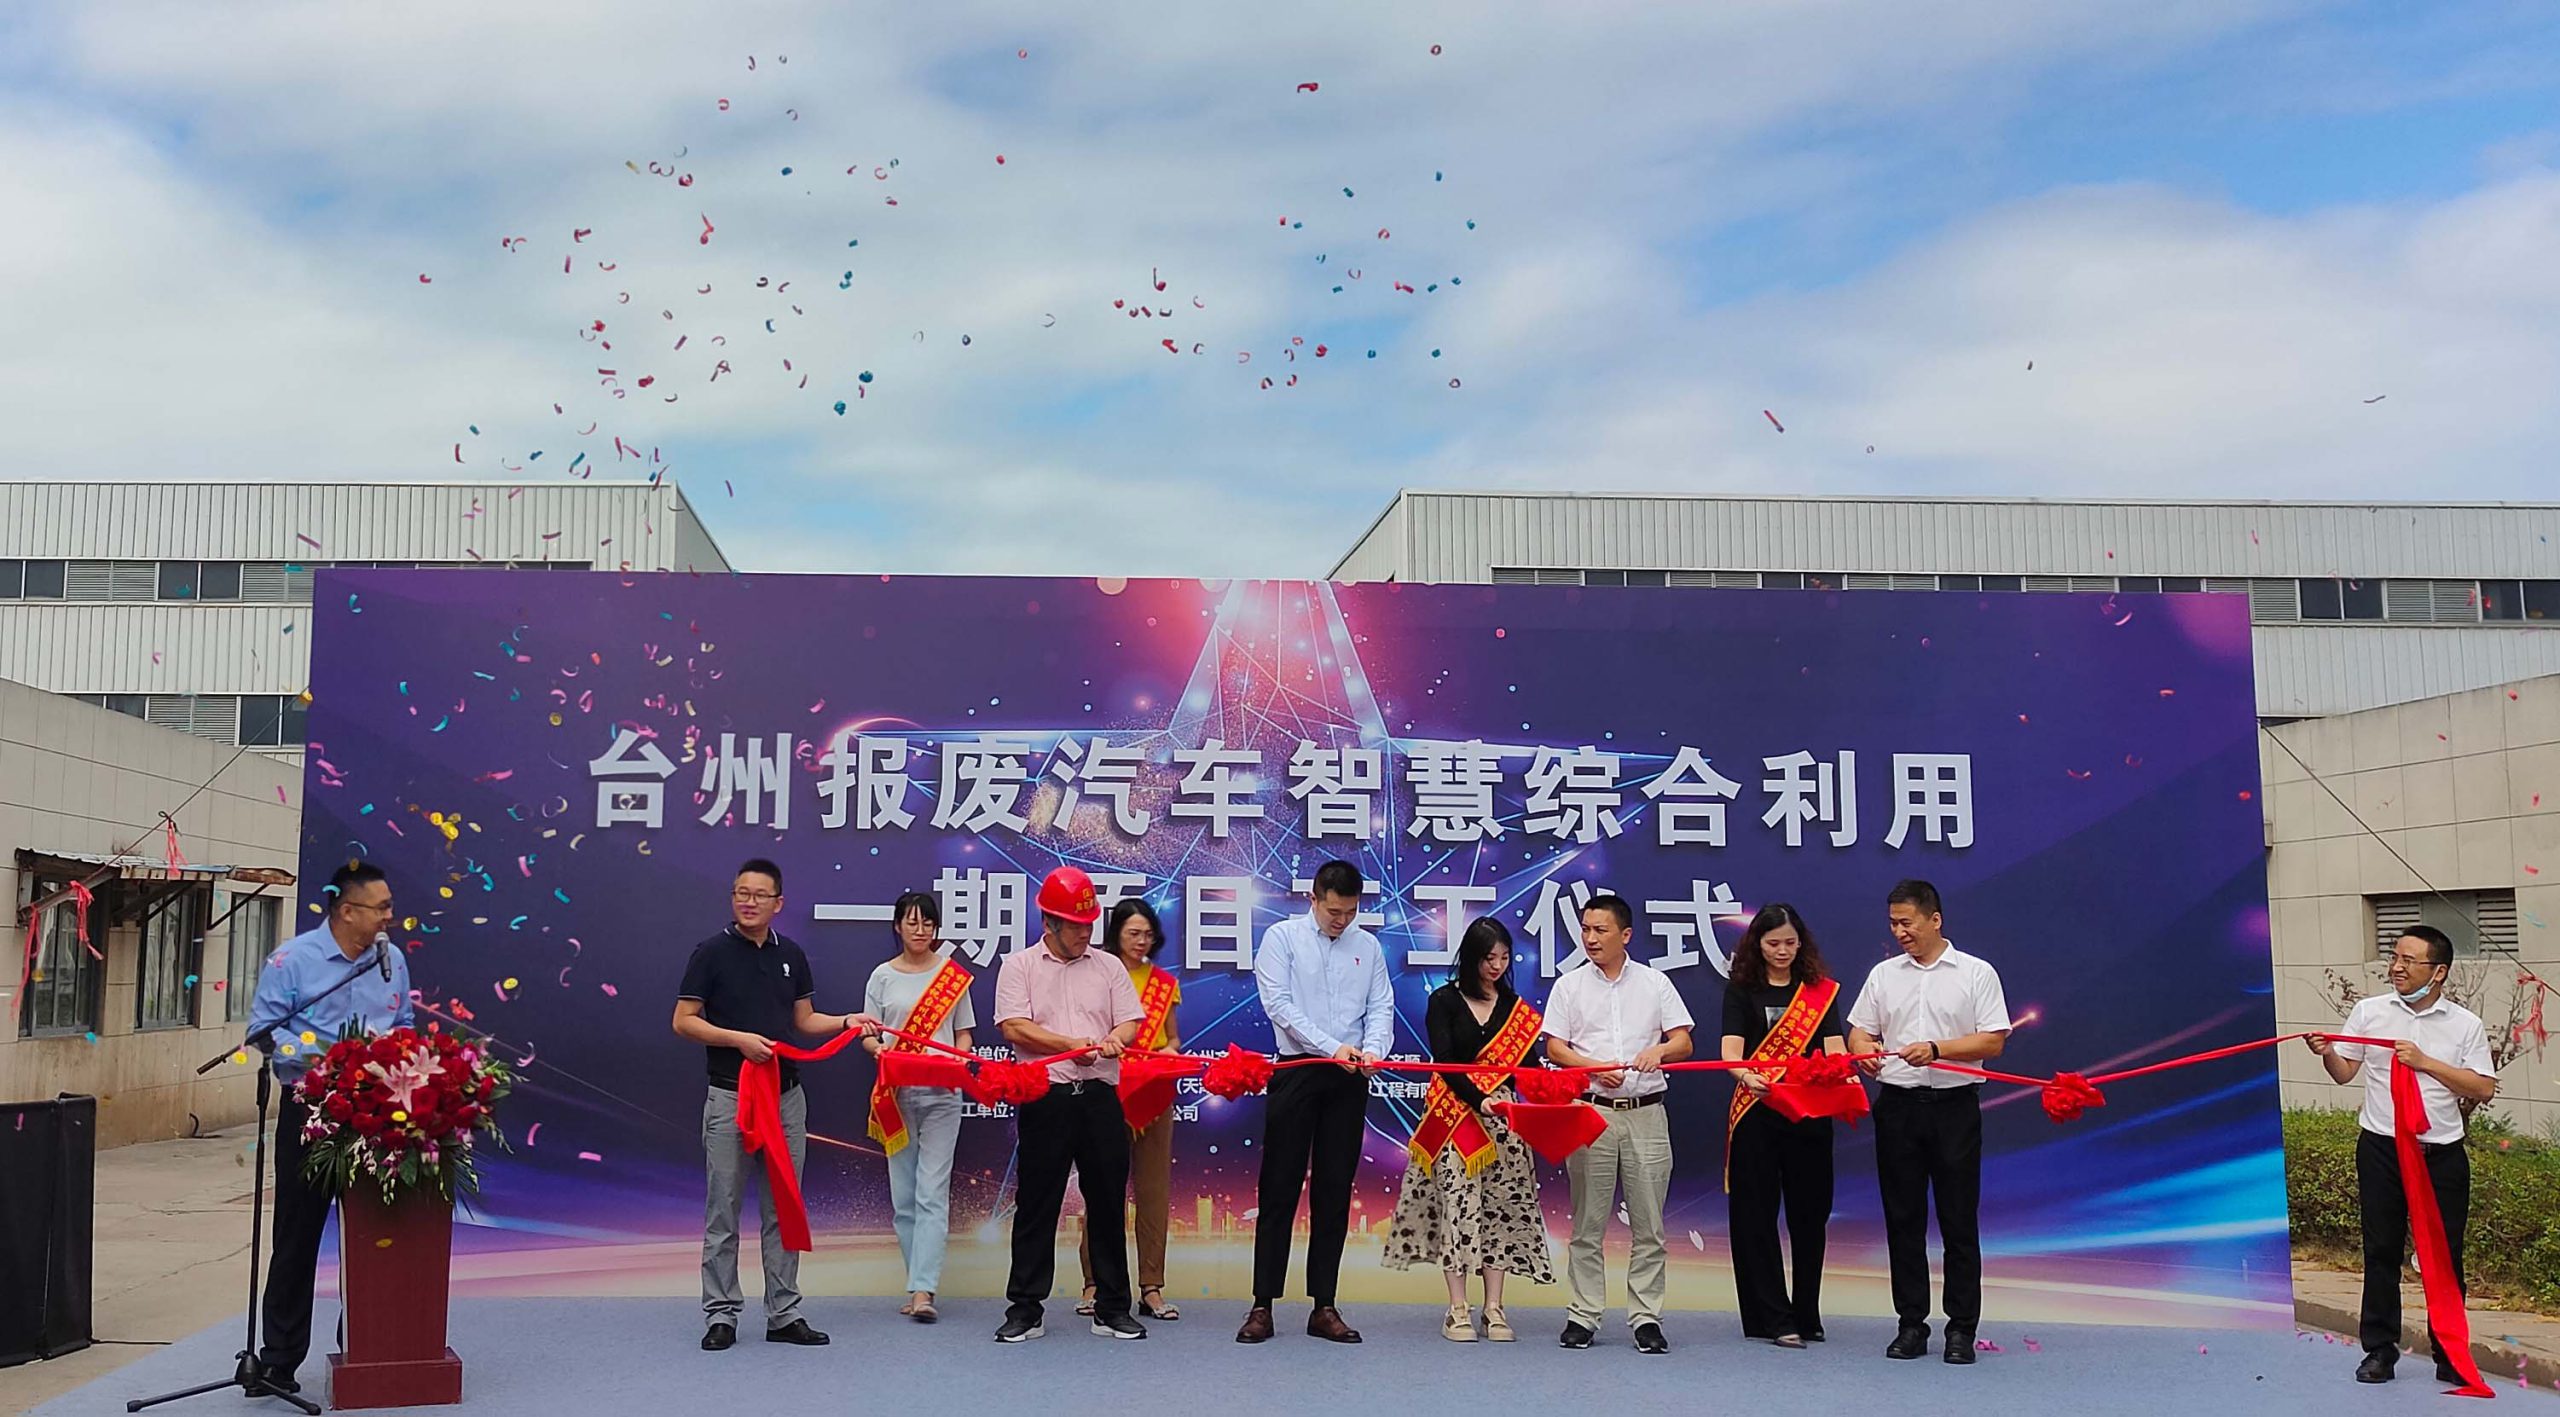 The groundbreaking ceremony of Qishun ELV comprehensive utilization project successfully held